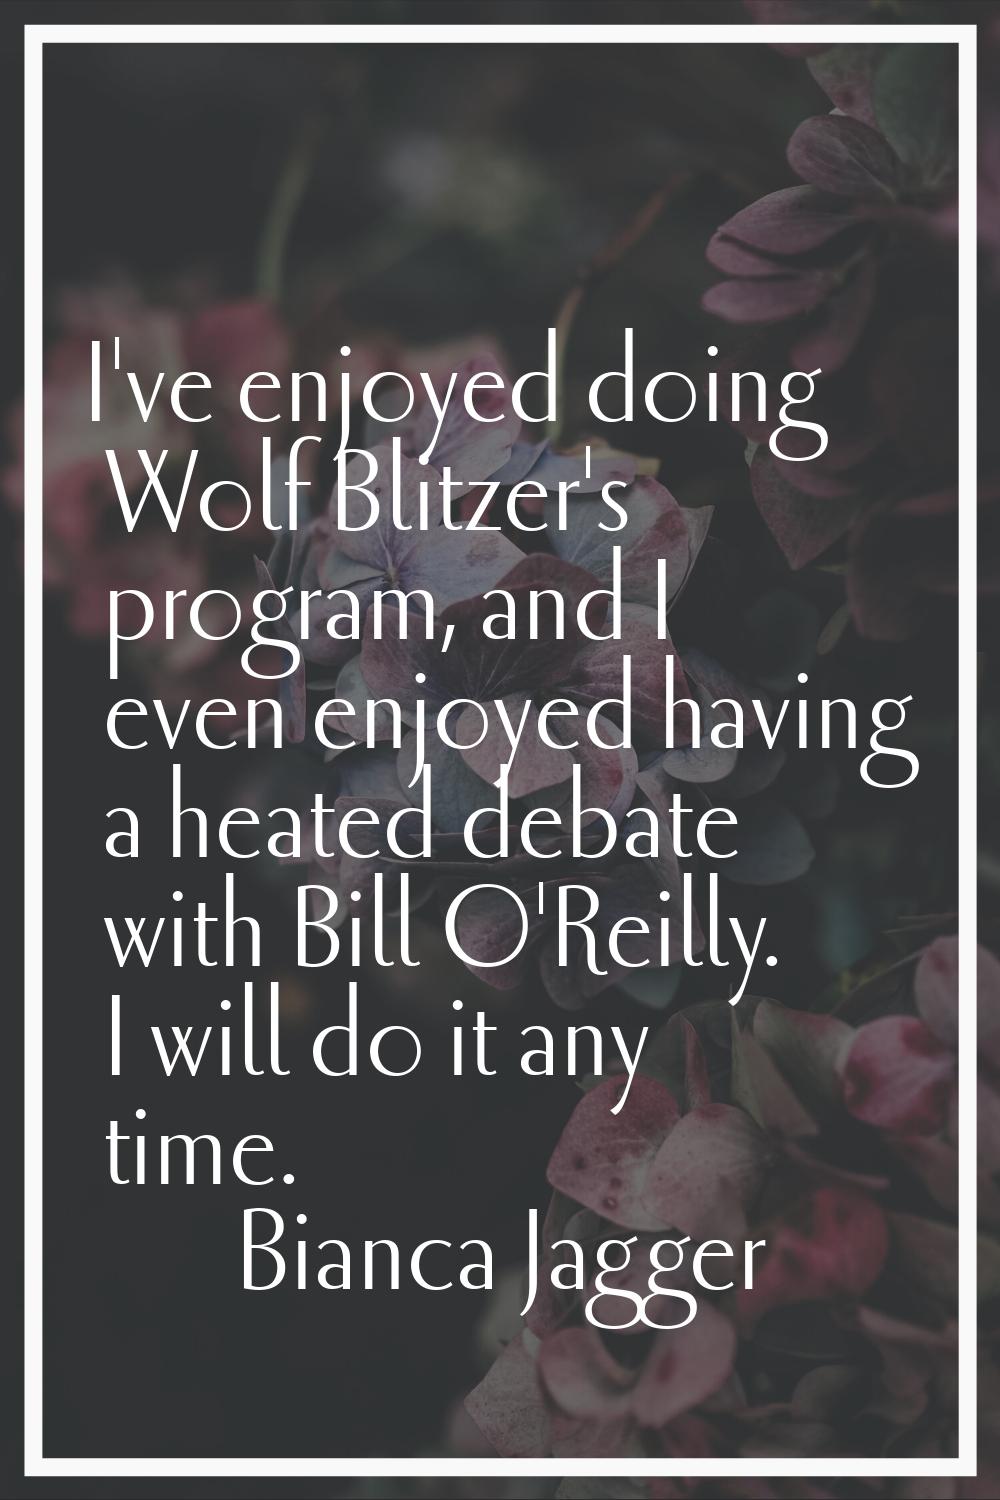 I've enjoyed doing Wolf Blitzer's program, and I even enjoyed having a heated debate with Bill O'Re